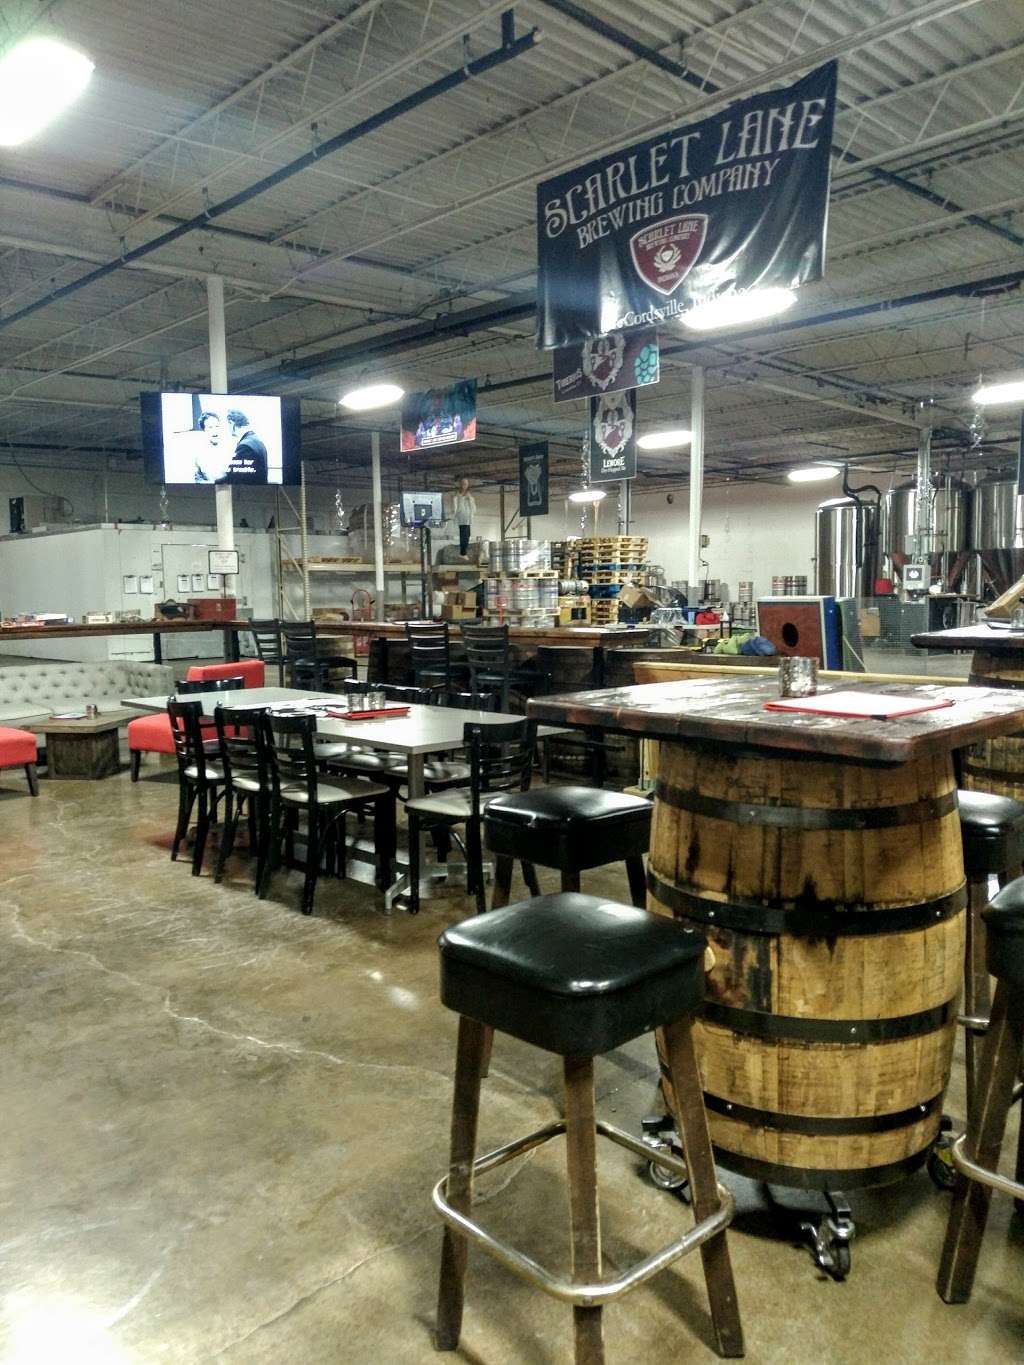 Scarlet Lane Brewing Company | 7724 Depot St, McCordsville, IN 46055 | Phone: (317) 336-1590